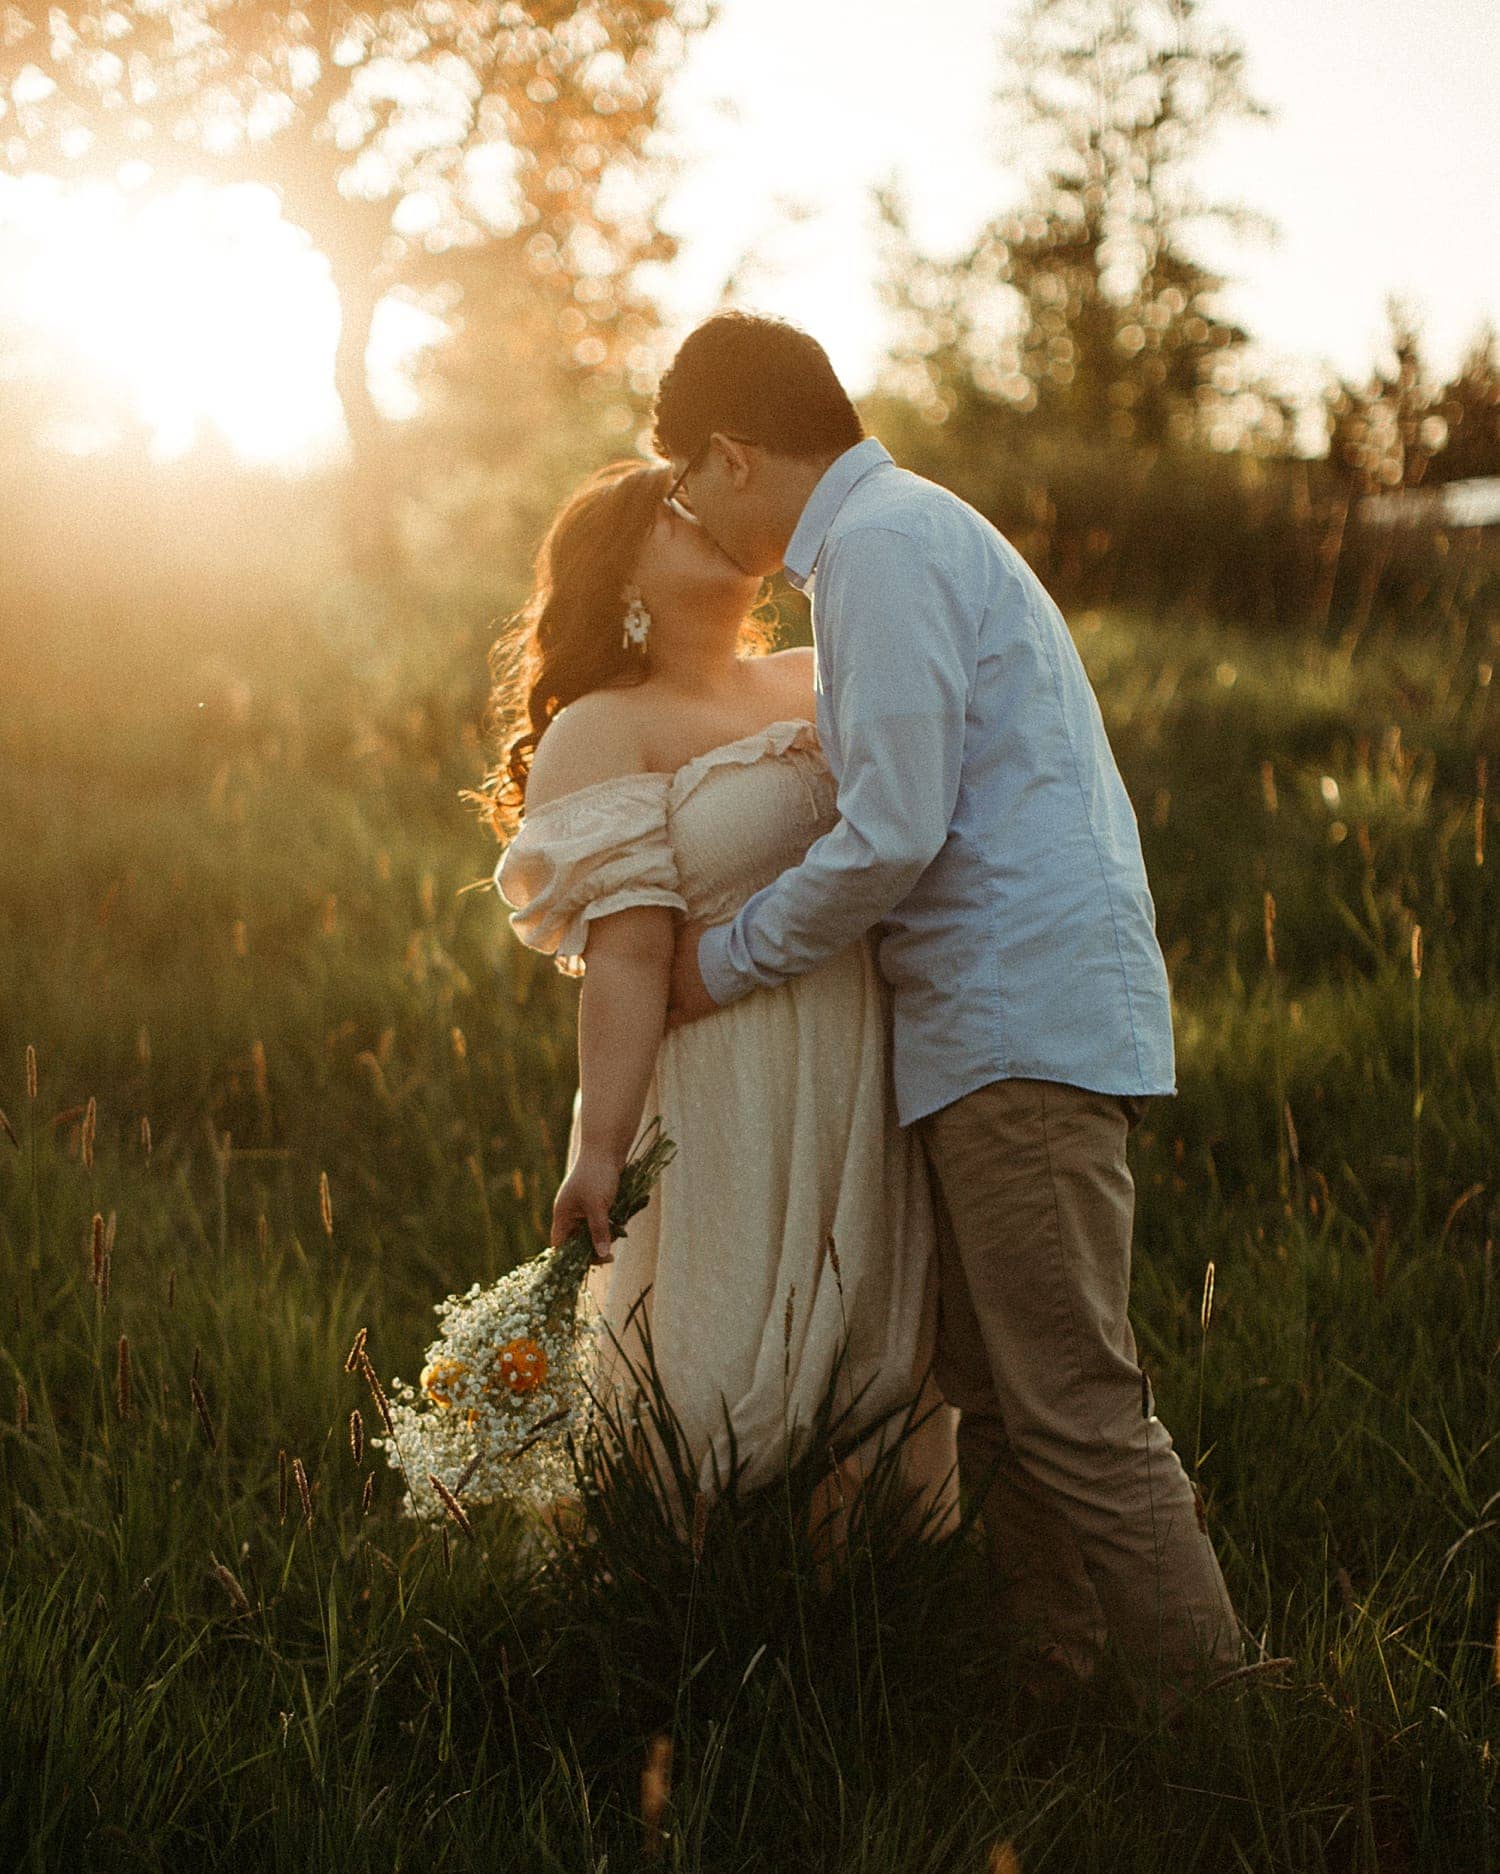 romantic and passionate kiss by adorable asian couple during golden hour light in a field cottagecore engagement session